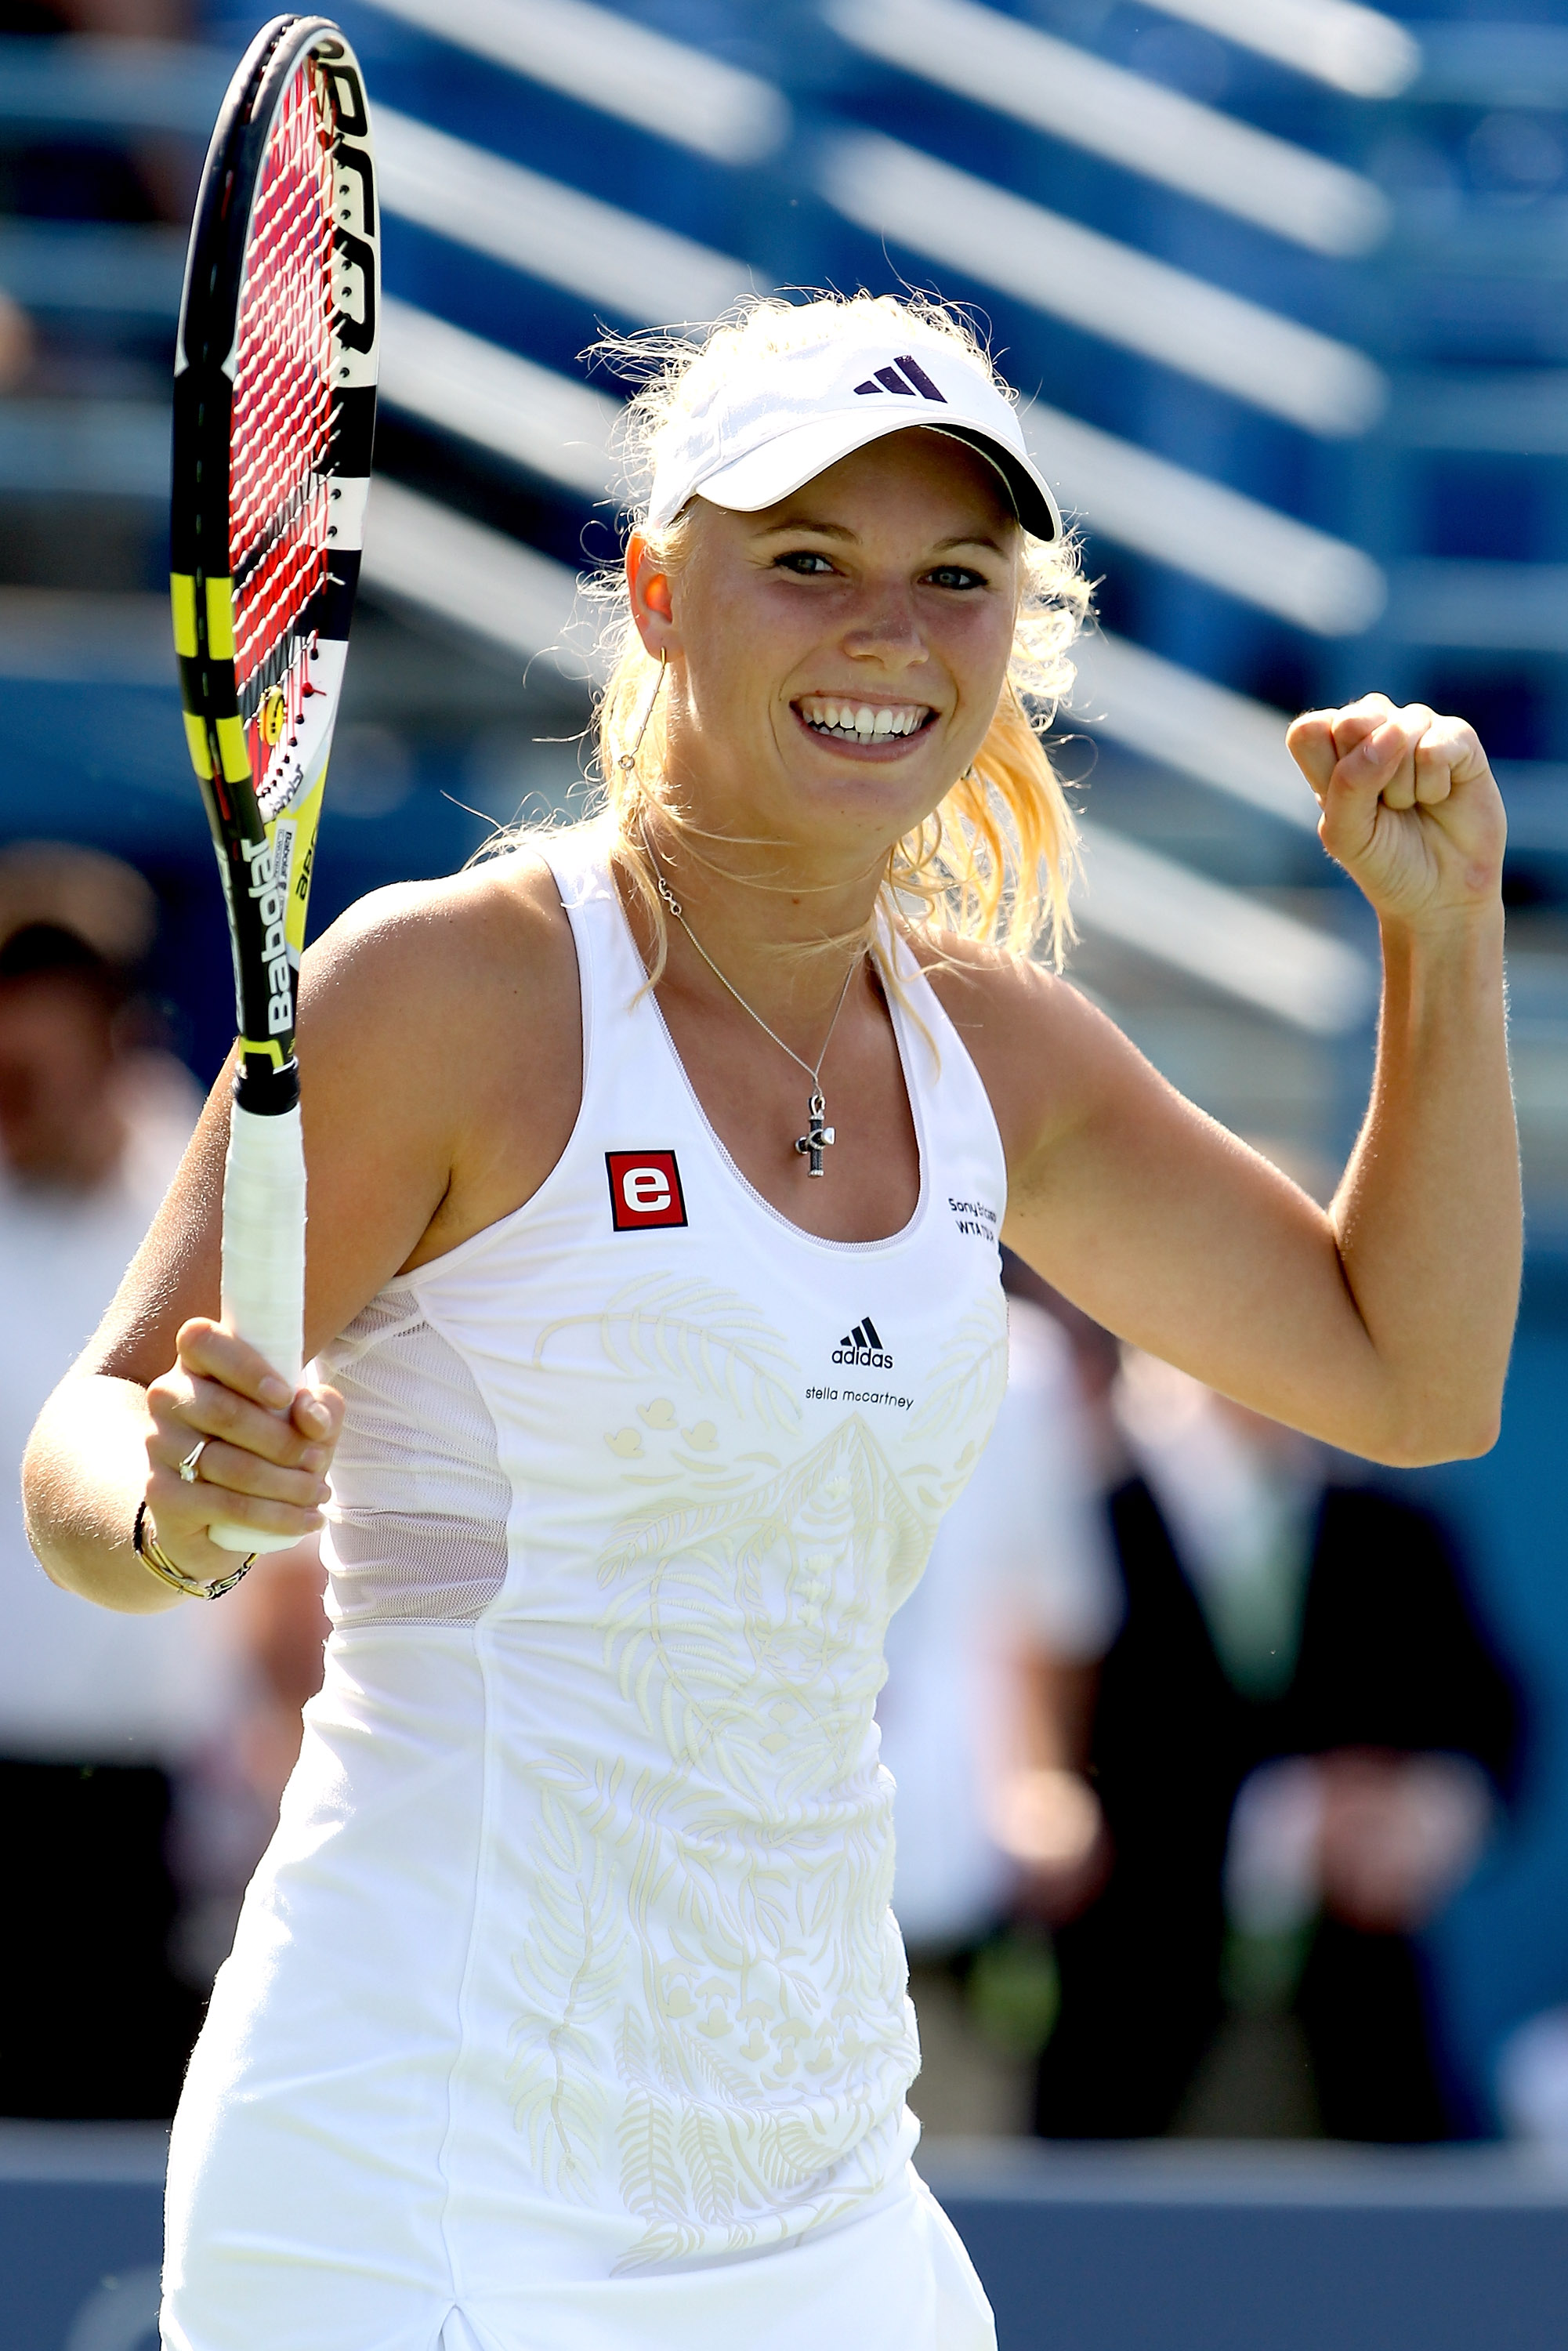 NEW HAVEN, CT - AUGUST 28:  Caroline Wozniacki of Denmark celebrates match point against Nadia Petrova of Russia during the final of the Pilot Pen tennis tournament at the Connecticut Tennis Center on August 28, 2010 in New Haven, Connecticut.  Wozniacki